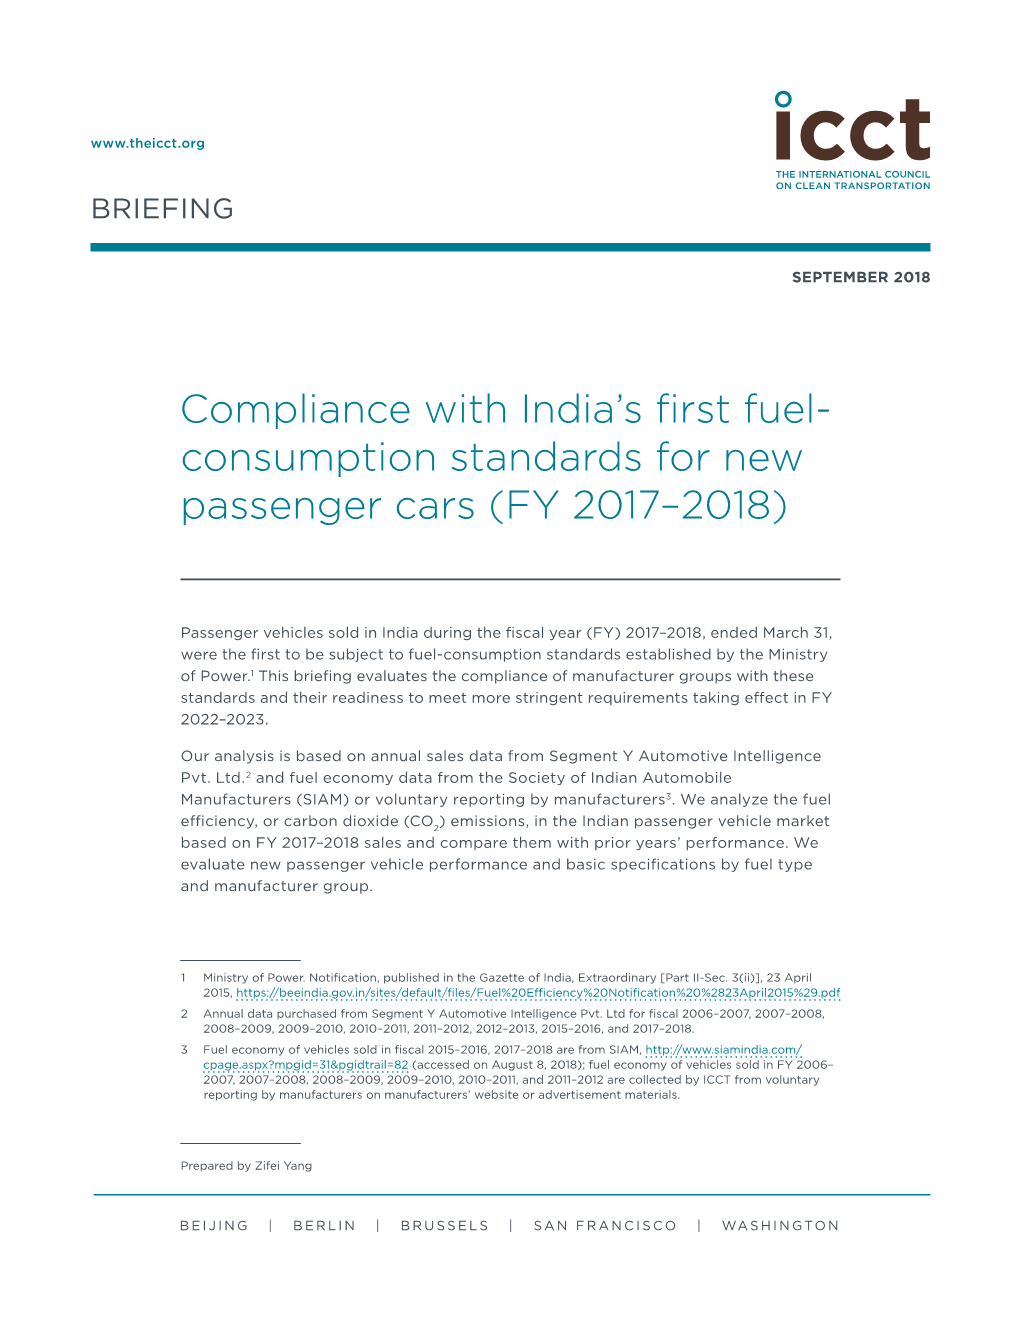 Compliance with India's First Fuel-Consumption Standards for New